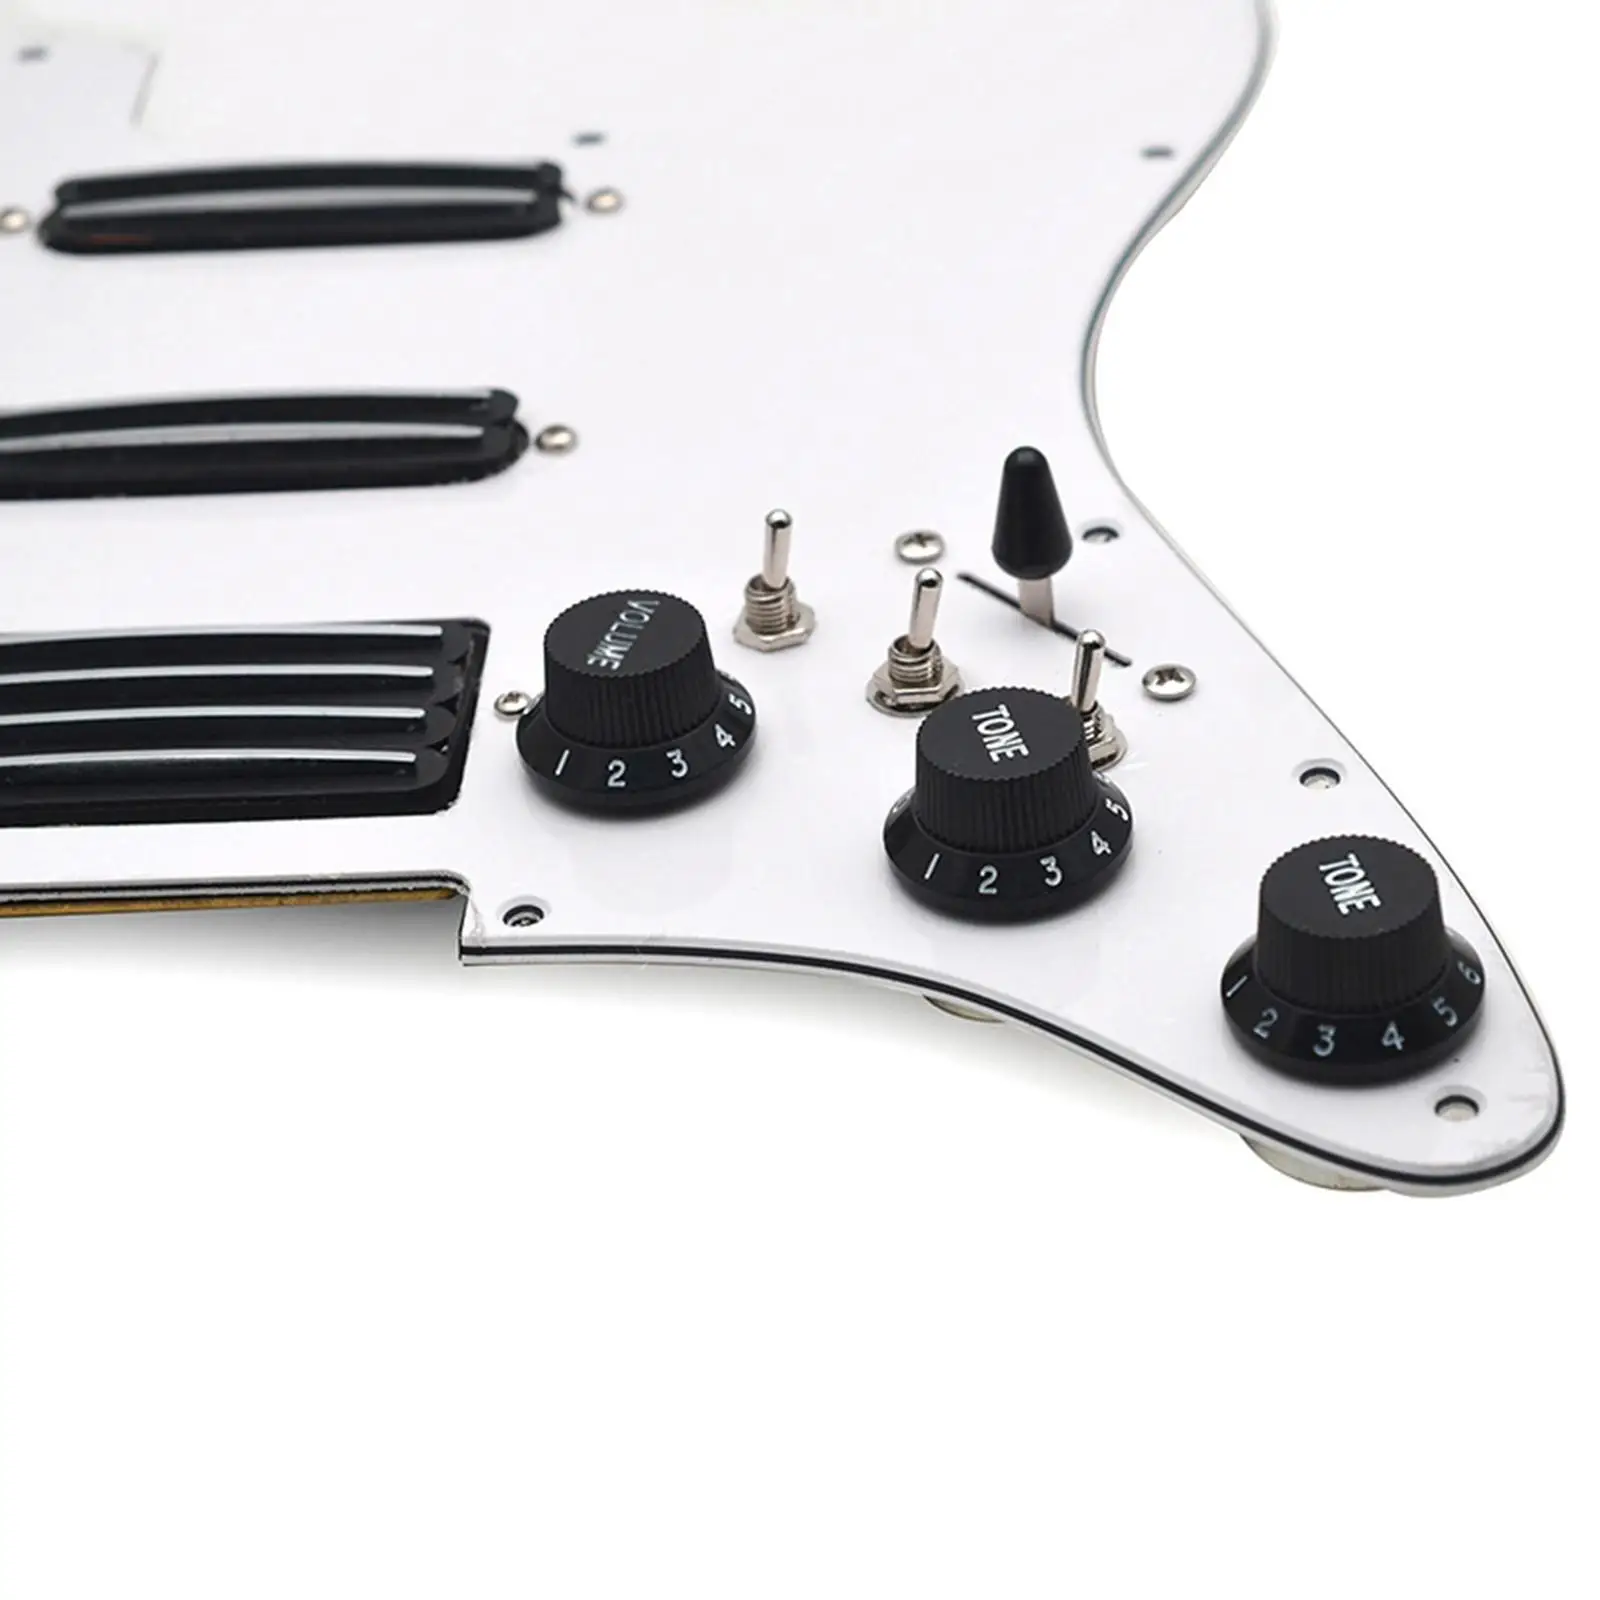 Electric Guitar Pickup Guard HSS Pickguard for Electric Guitar Replacement Accessories